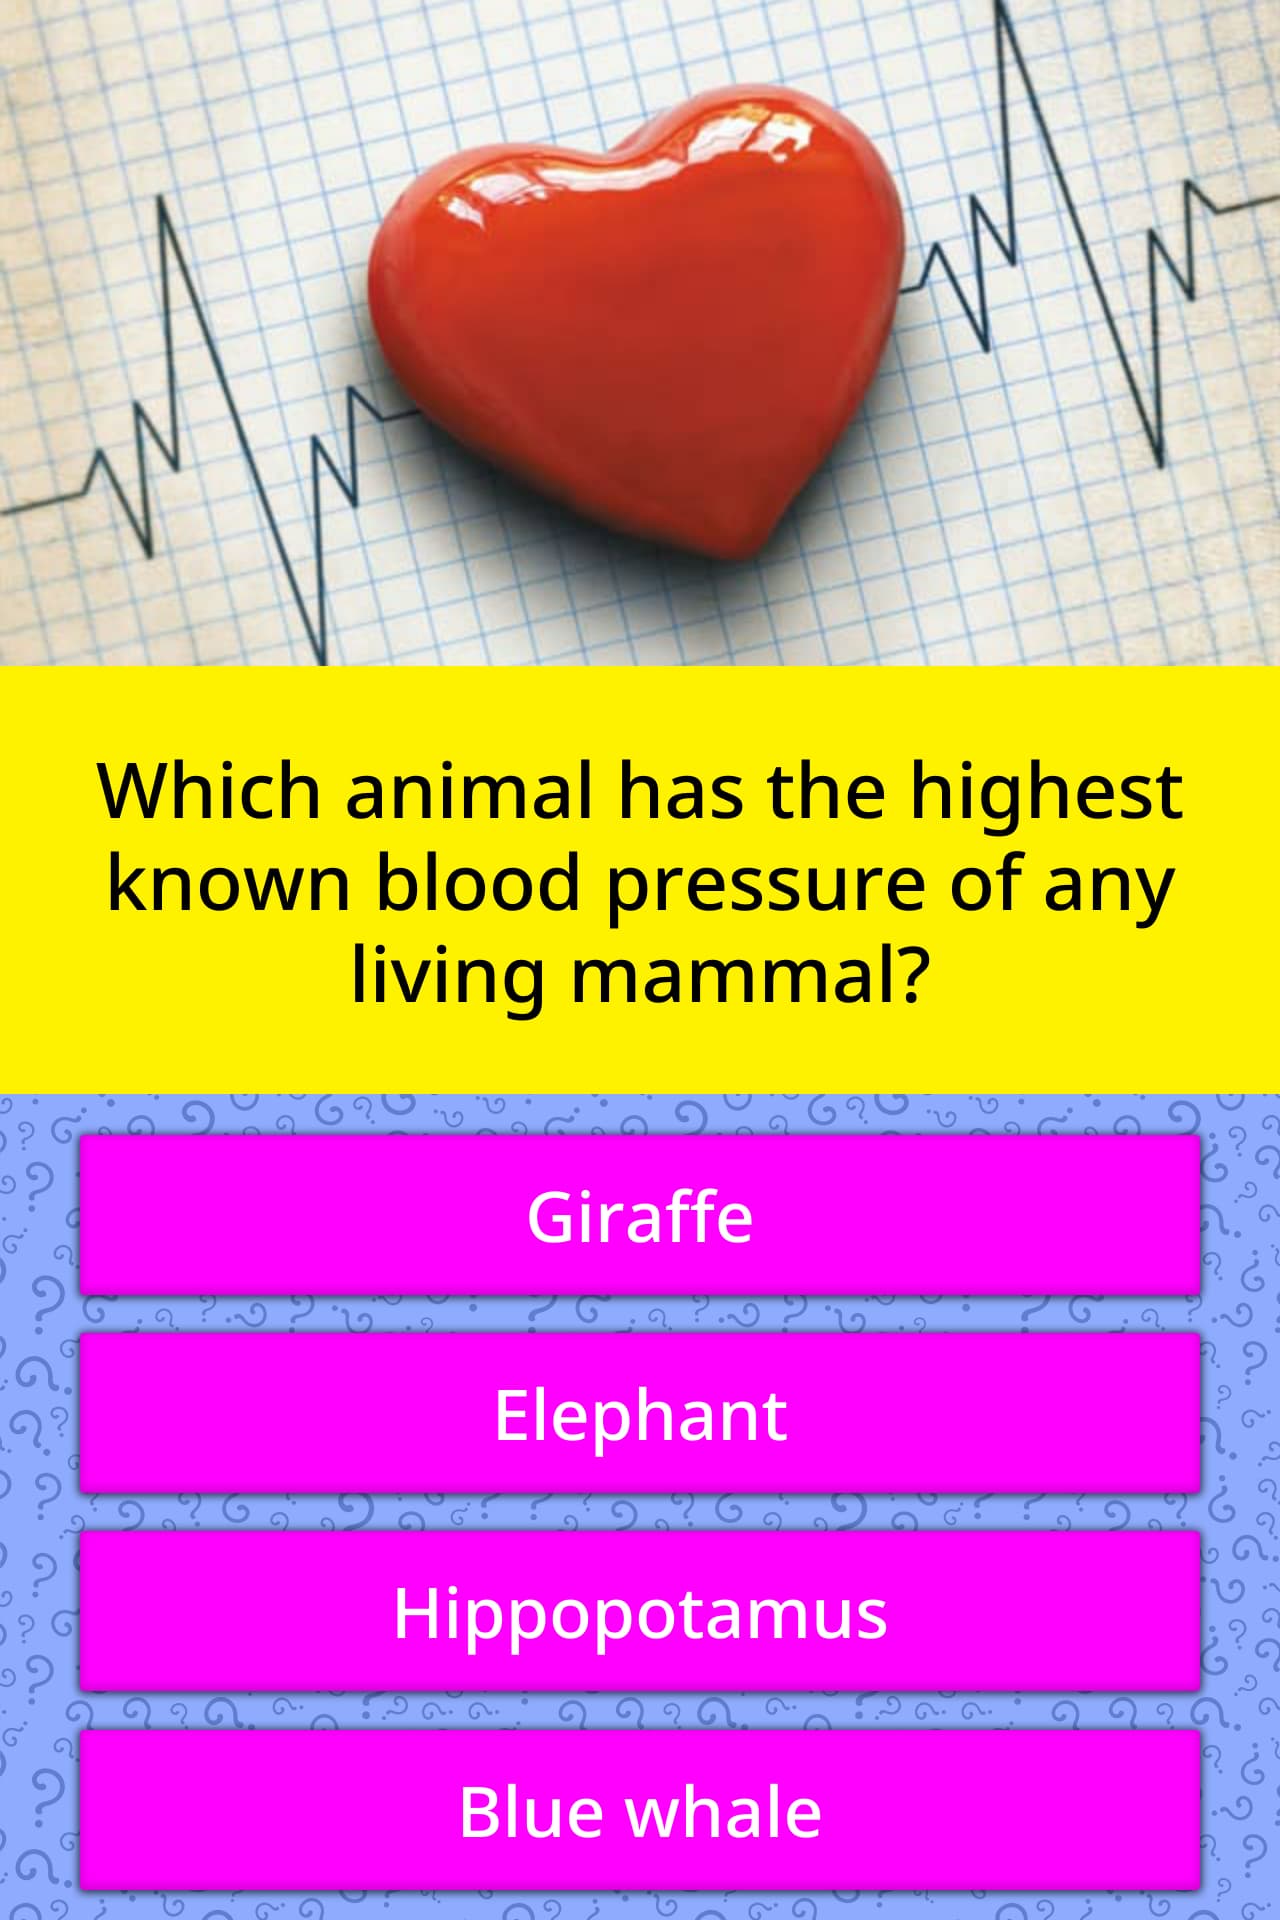 Which animal has the highest known blood pressure of any living mammal?